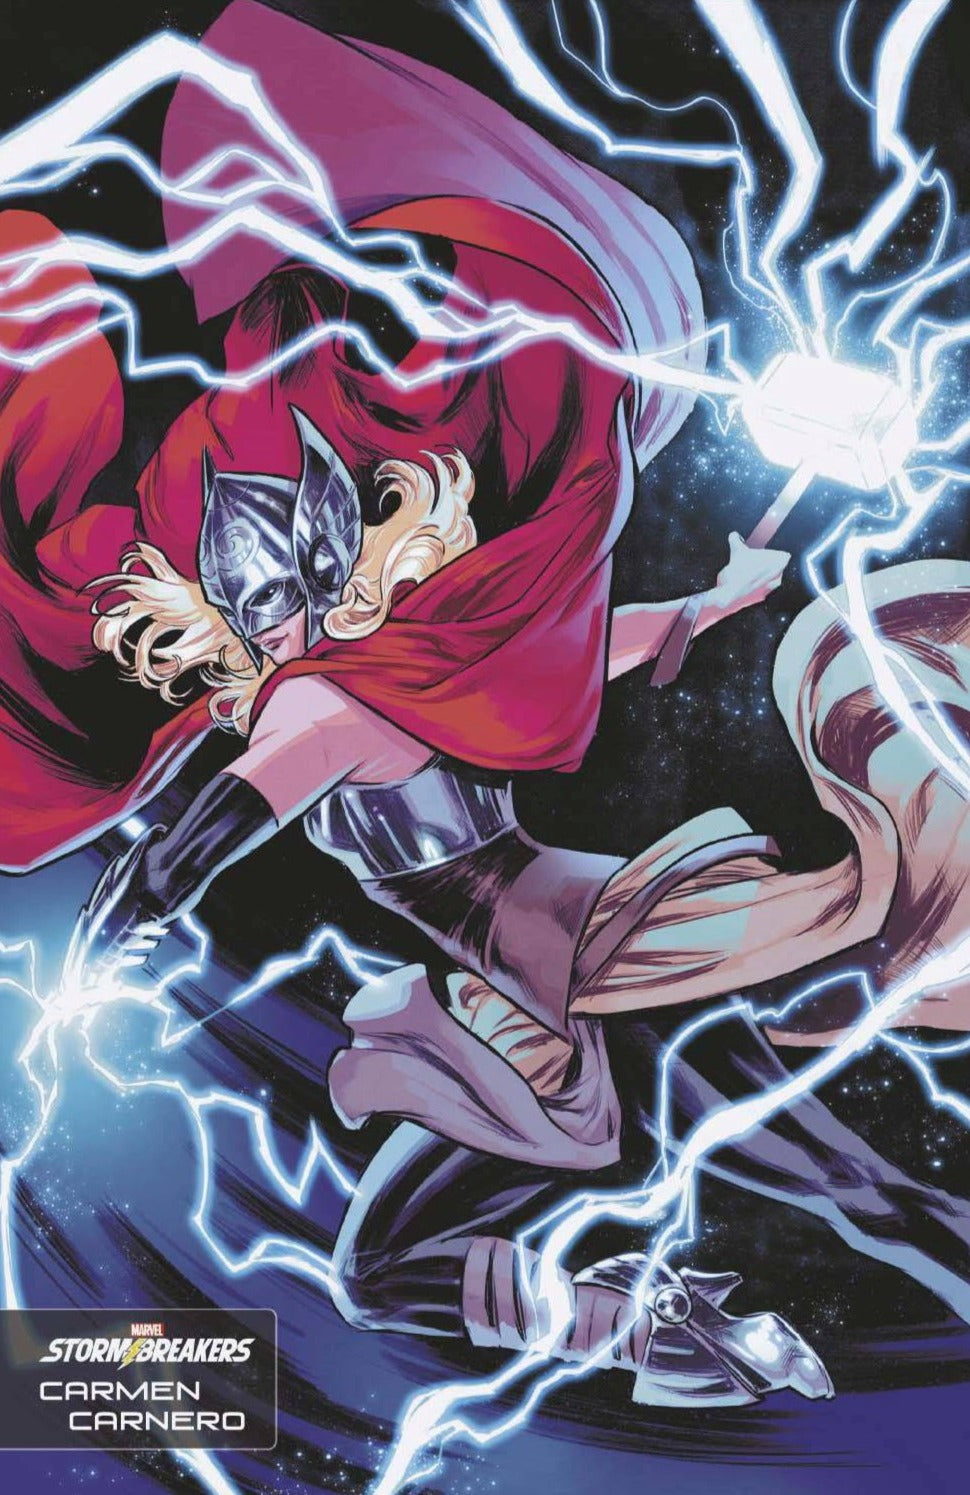 Jane Foster Mighty Thor #1 (of 5) Carnero Stormbreakers Variant